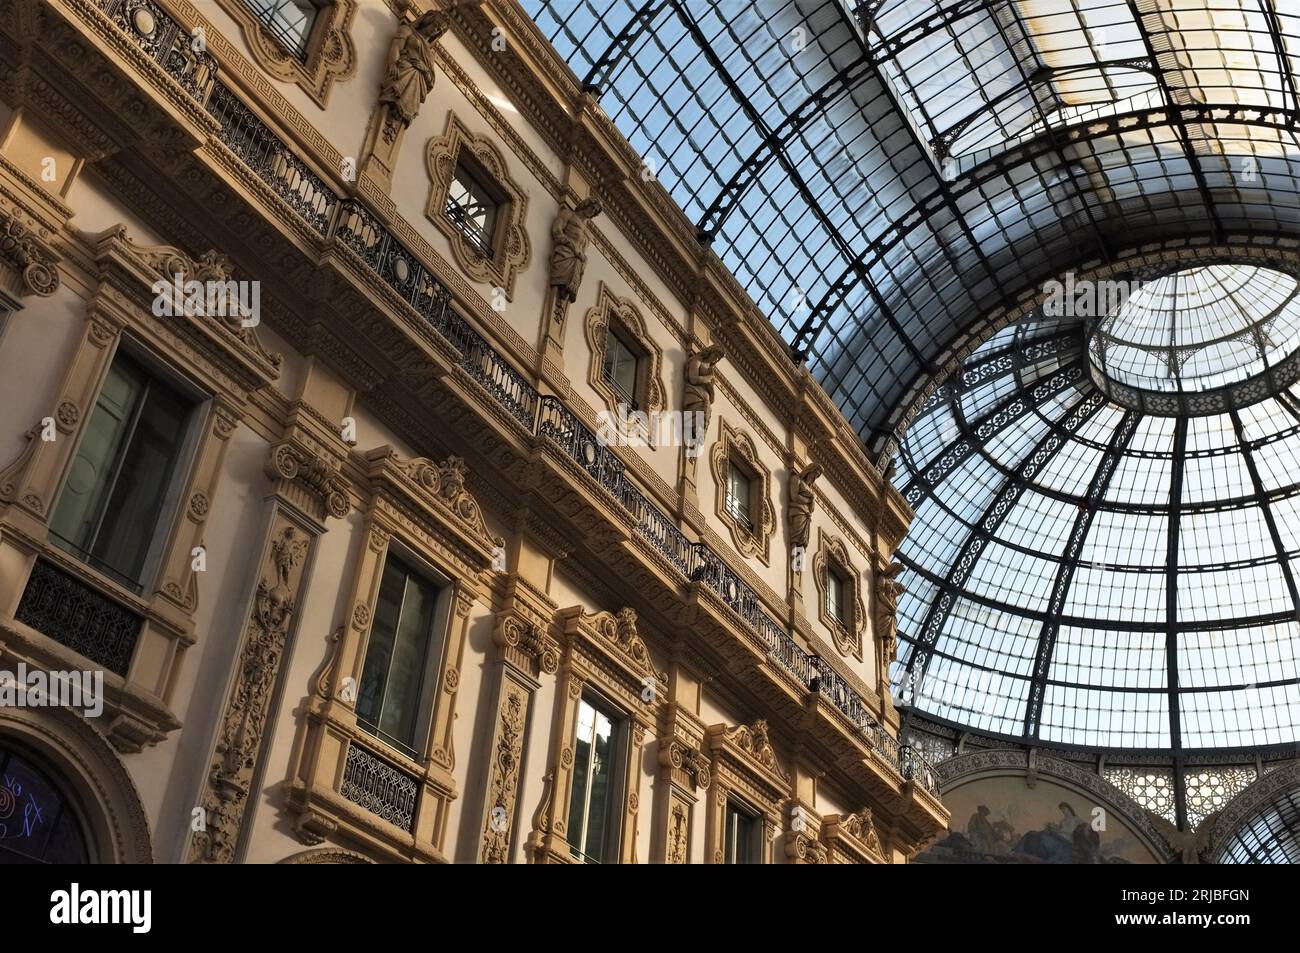 MILAN, ITALY - MARCH 17, 2023: The Galleria Vittorio Emanuele structure, landmark of the city. Stock Photo